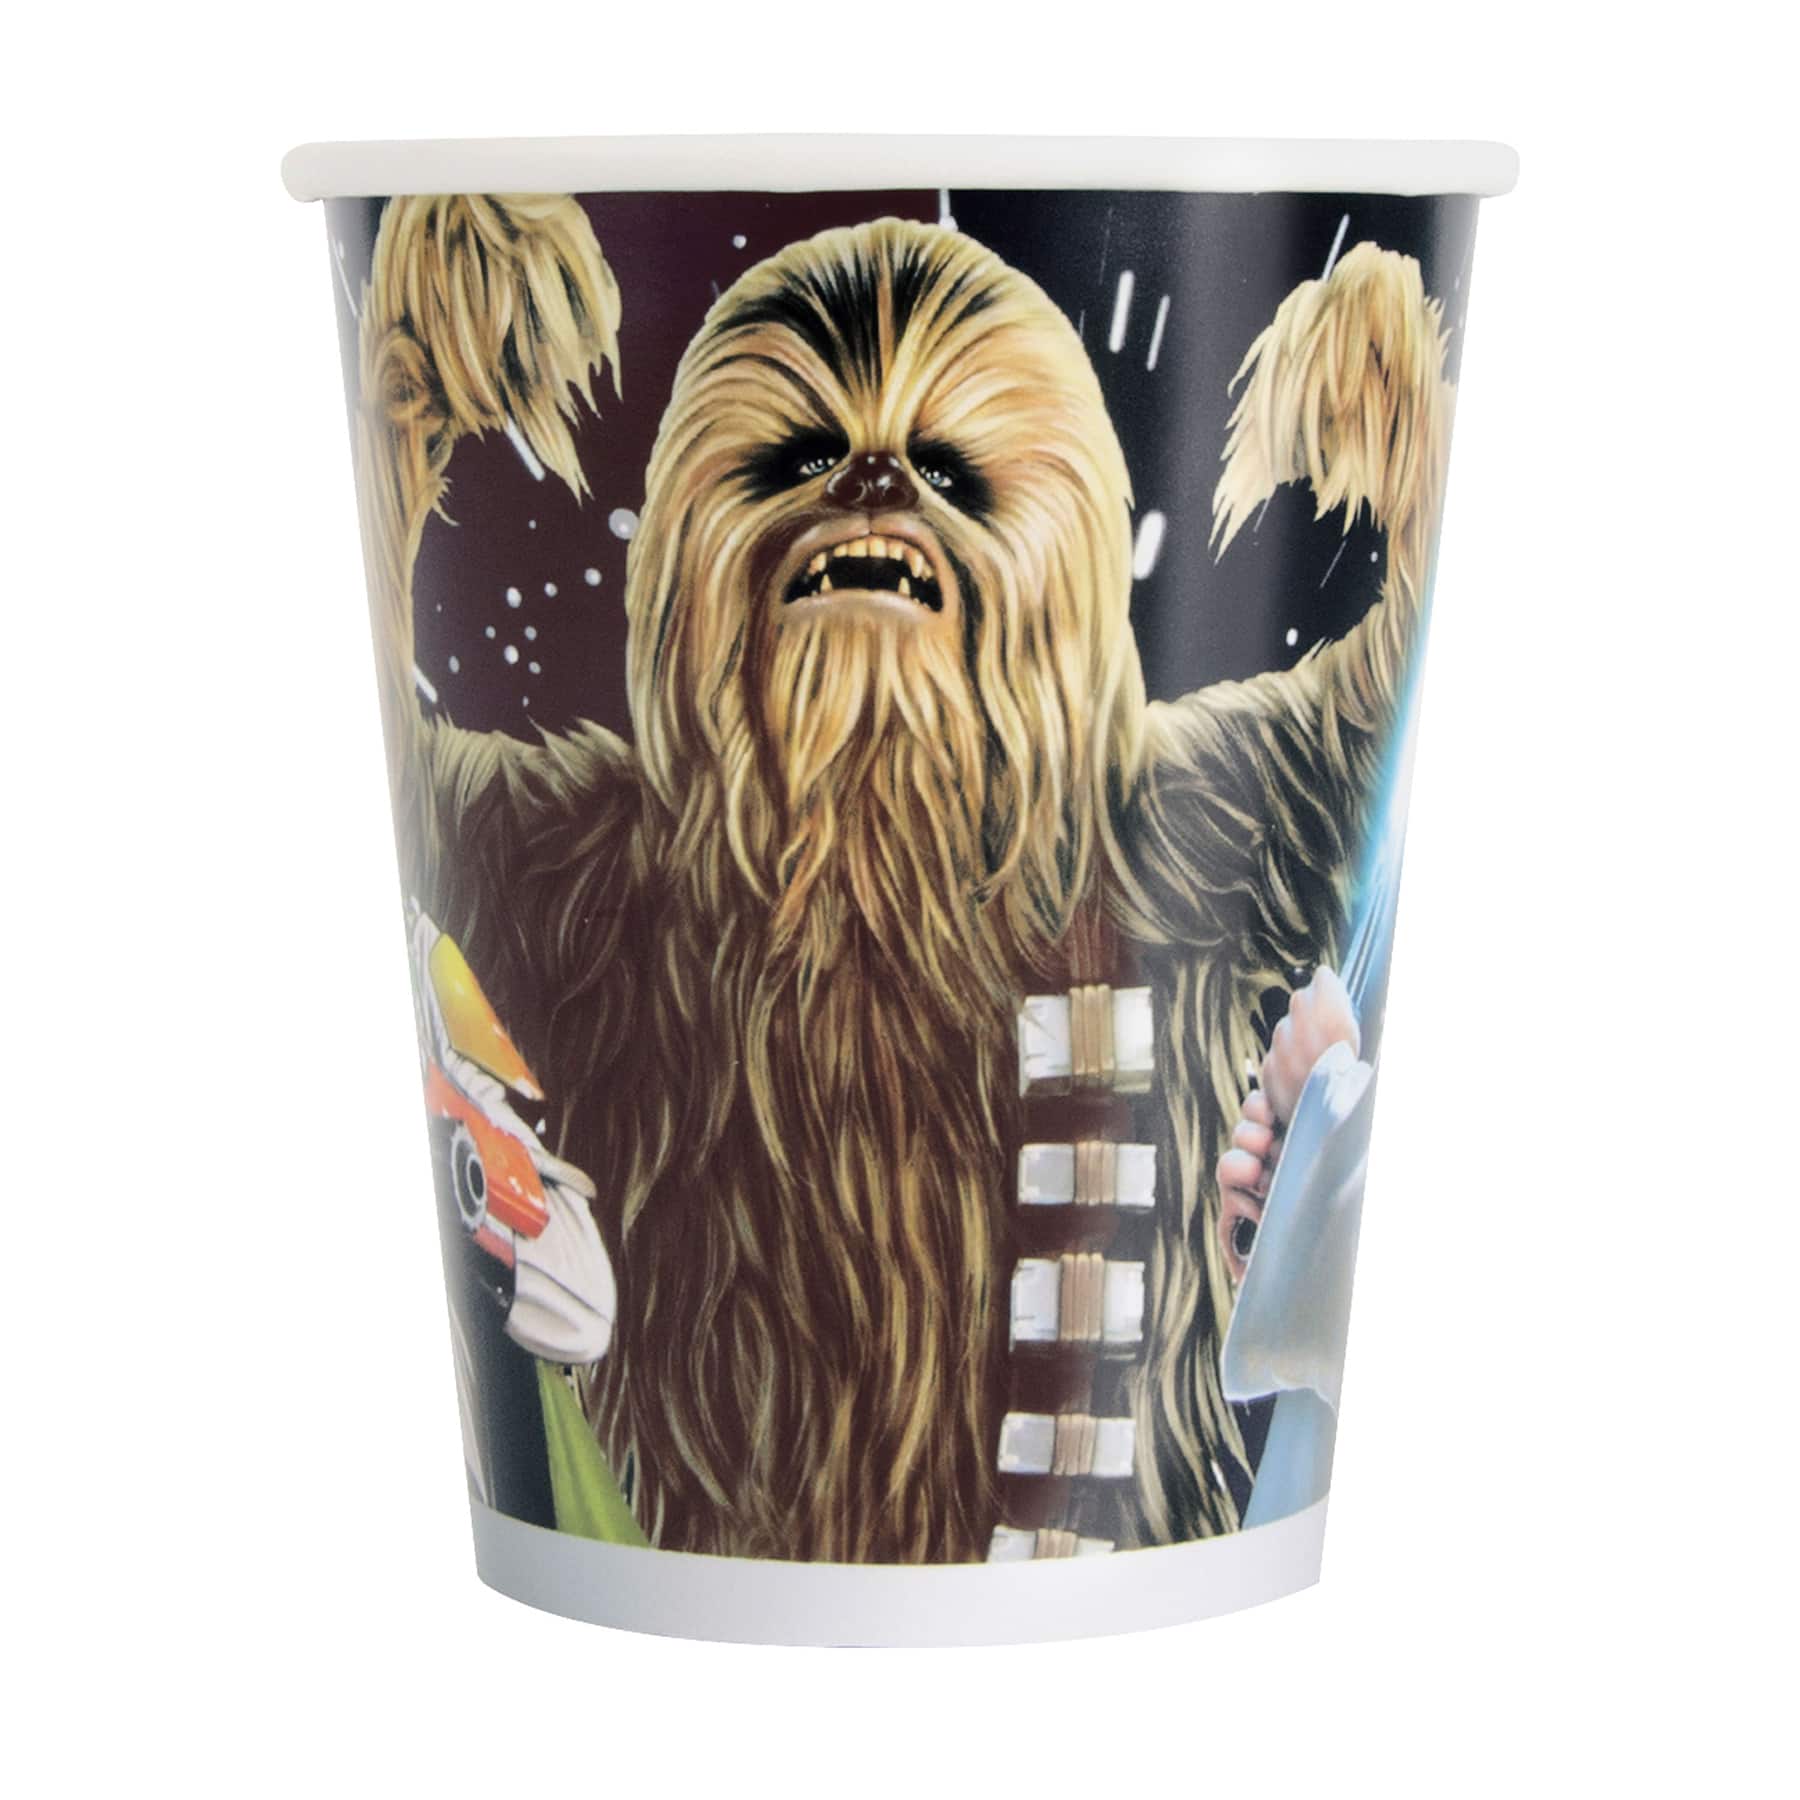 PACKAGE OF 8 STAR WARS BIRTHDAY PARTY PAPER CUPS 